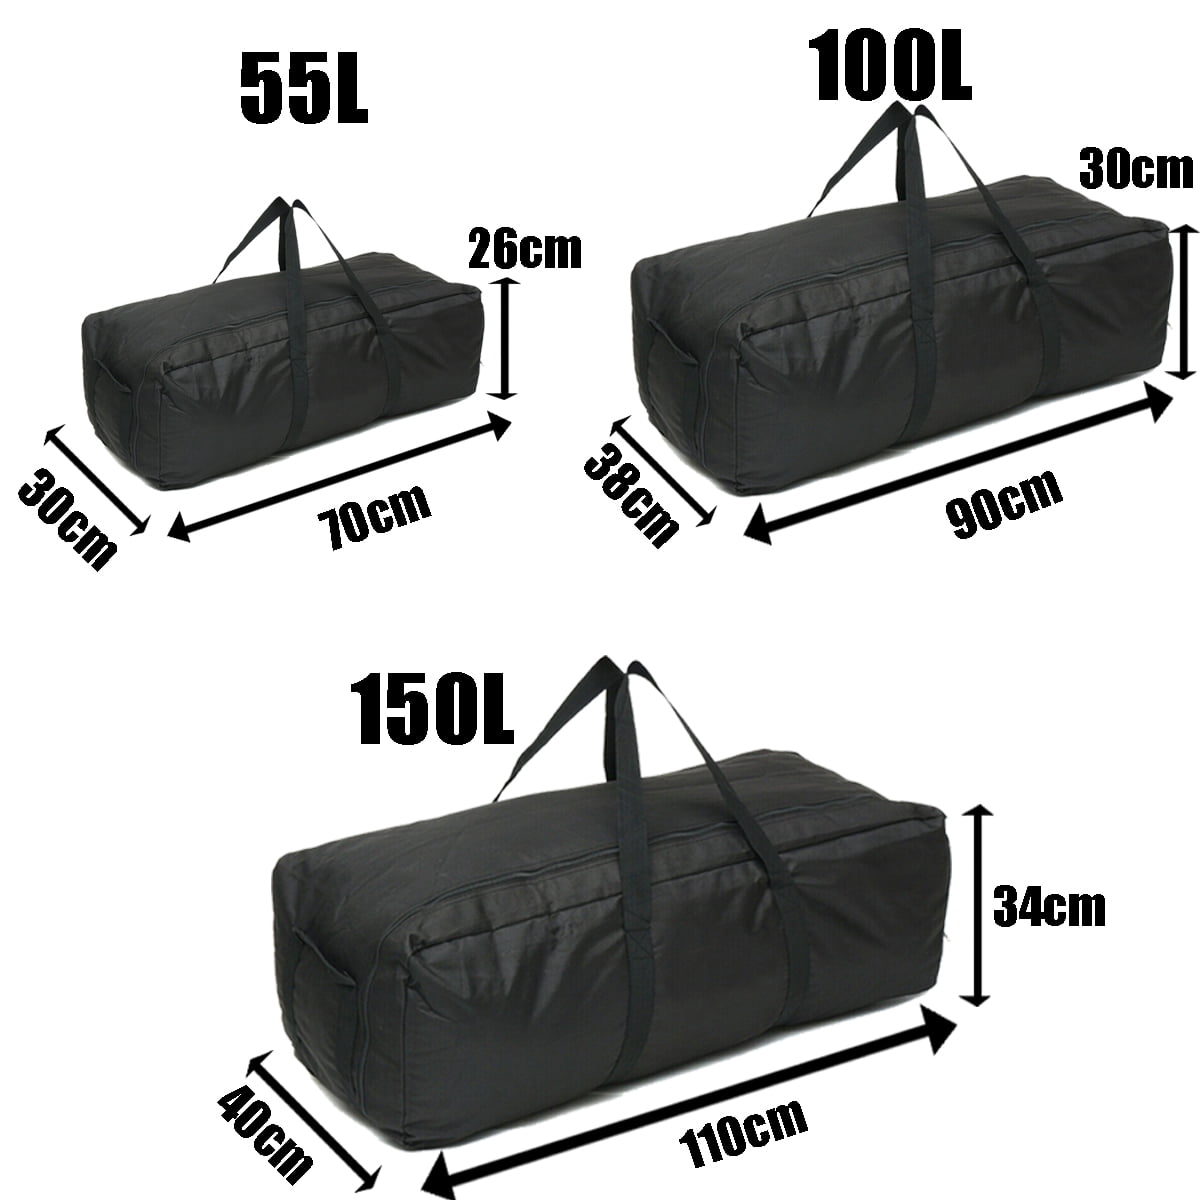 DYNWAVE Portable Foldable Waterproof Outdoor Travel Backpack Duffel Bag Tent Storage Pouch 43x43x43cm 